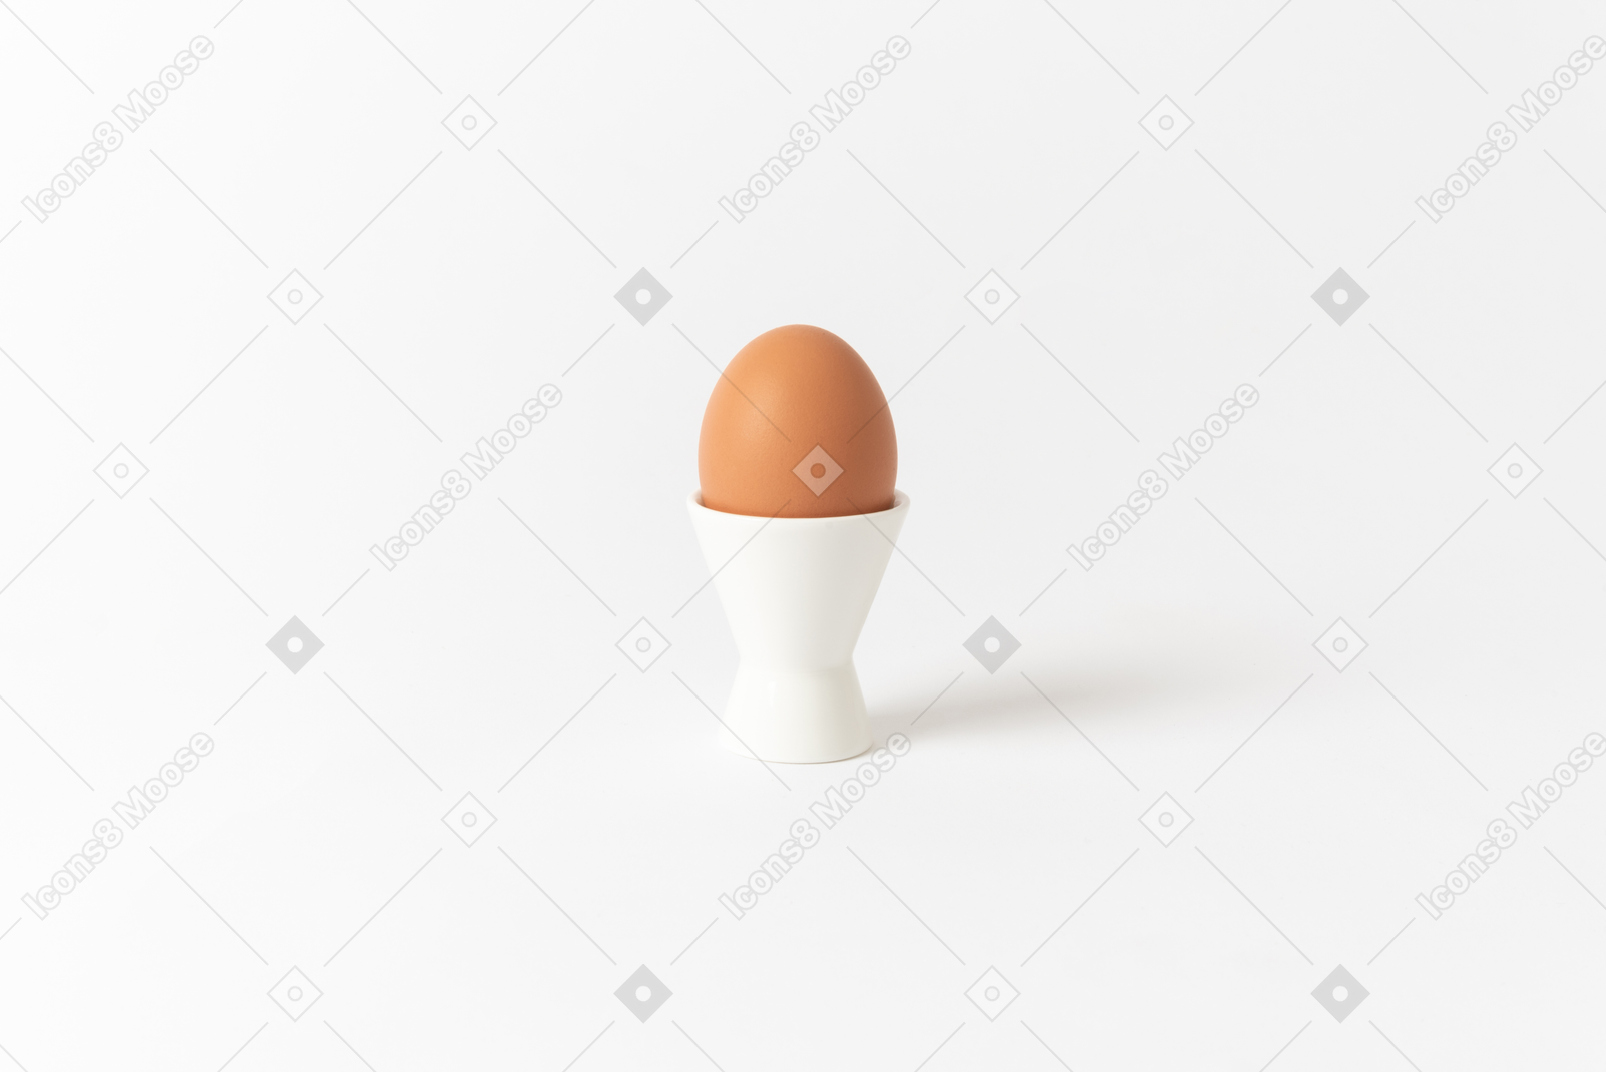 Brown egg served in a white egg cup